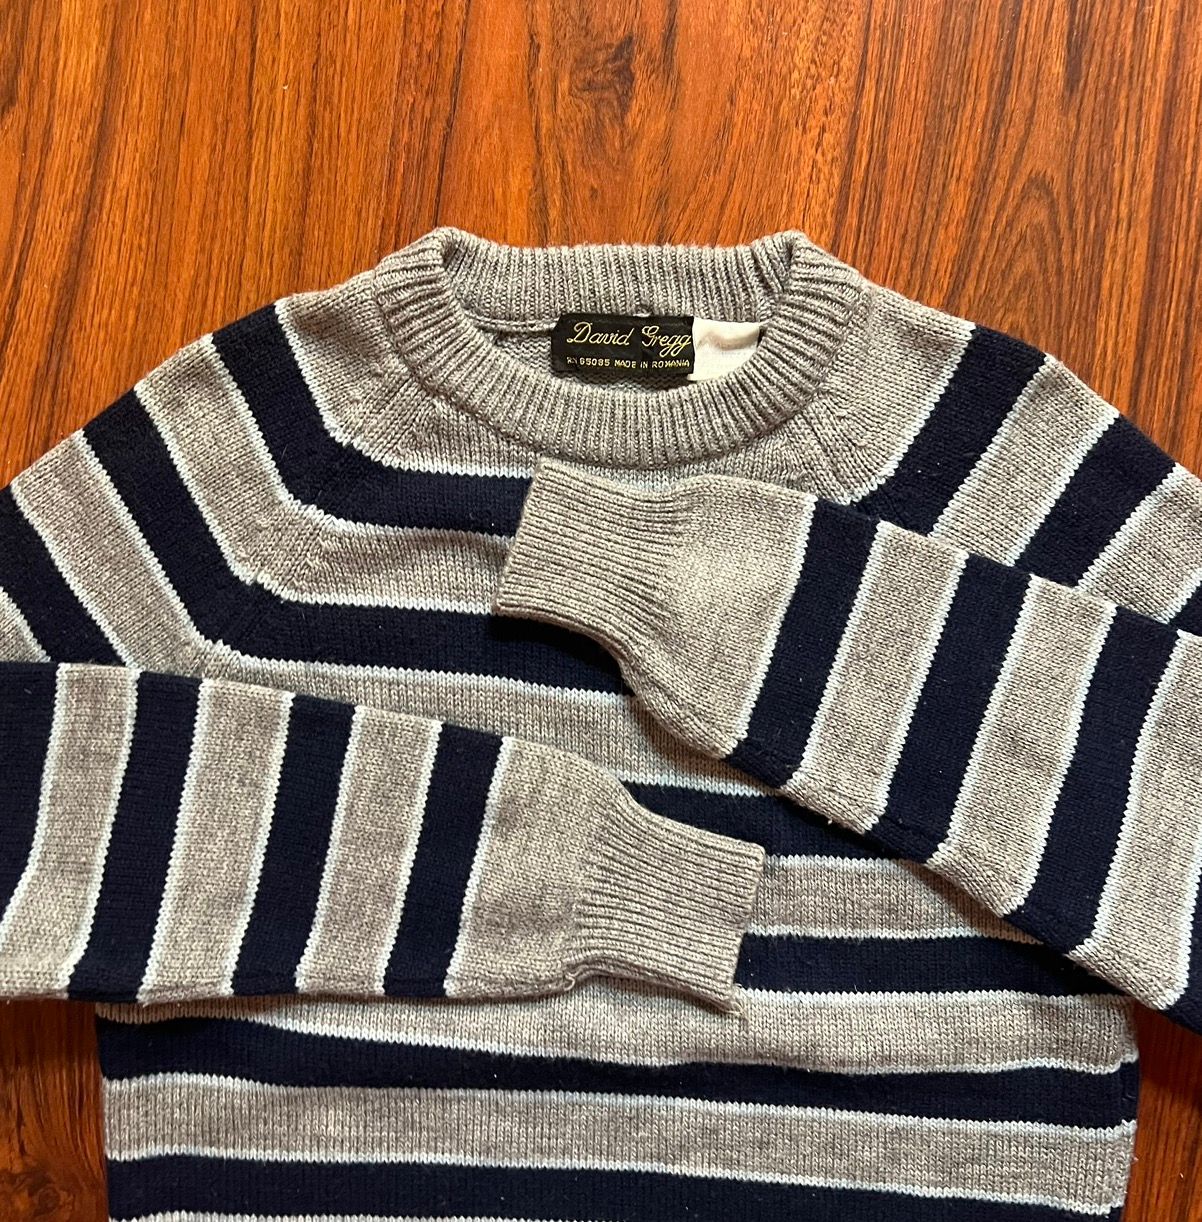 Vintage Vintage 80s David Gregg Wool Striped Sweater Romanian Made Size US M / EU 48-50 / 2 - 2 Preview